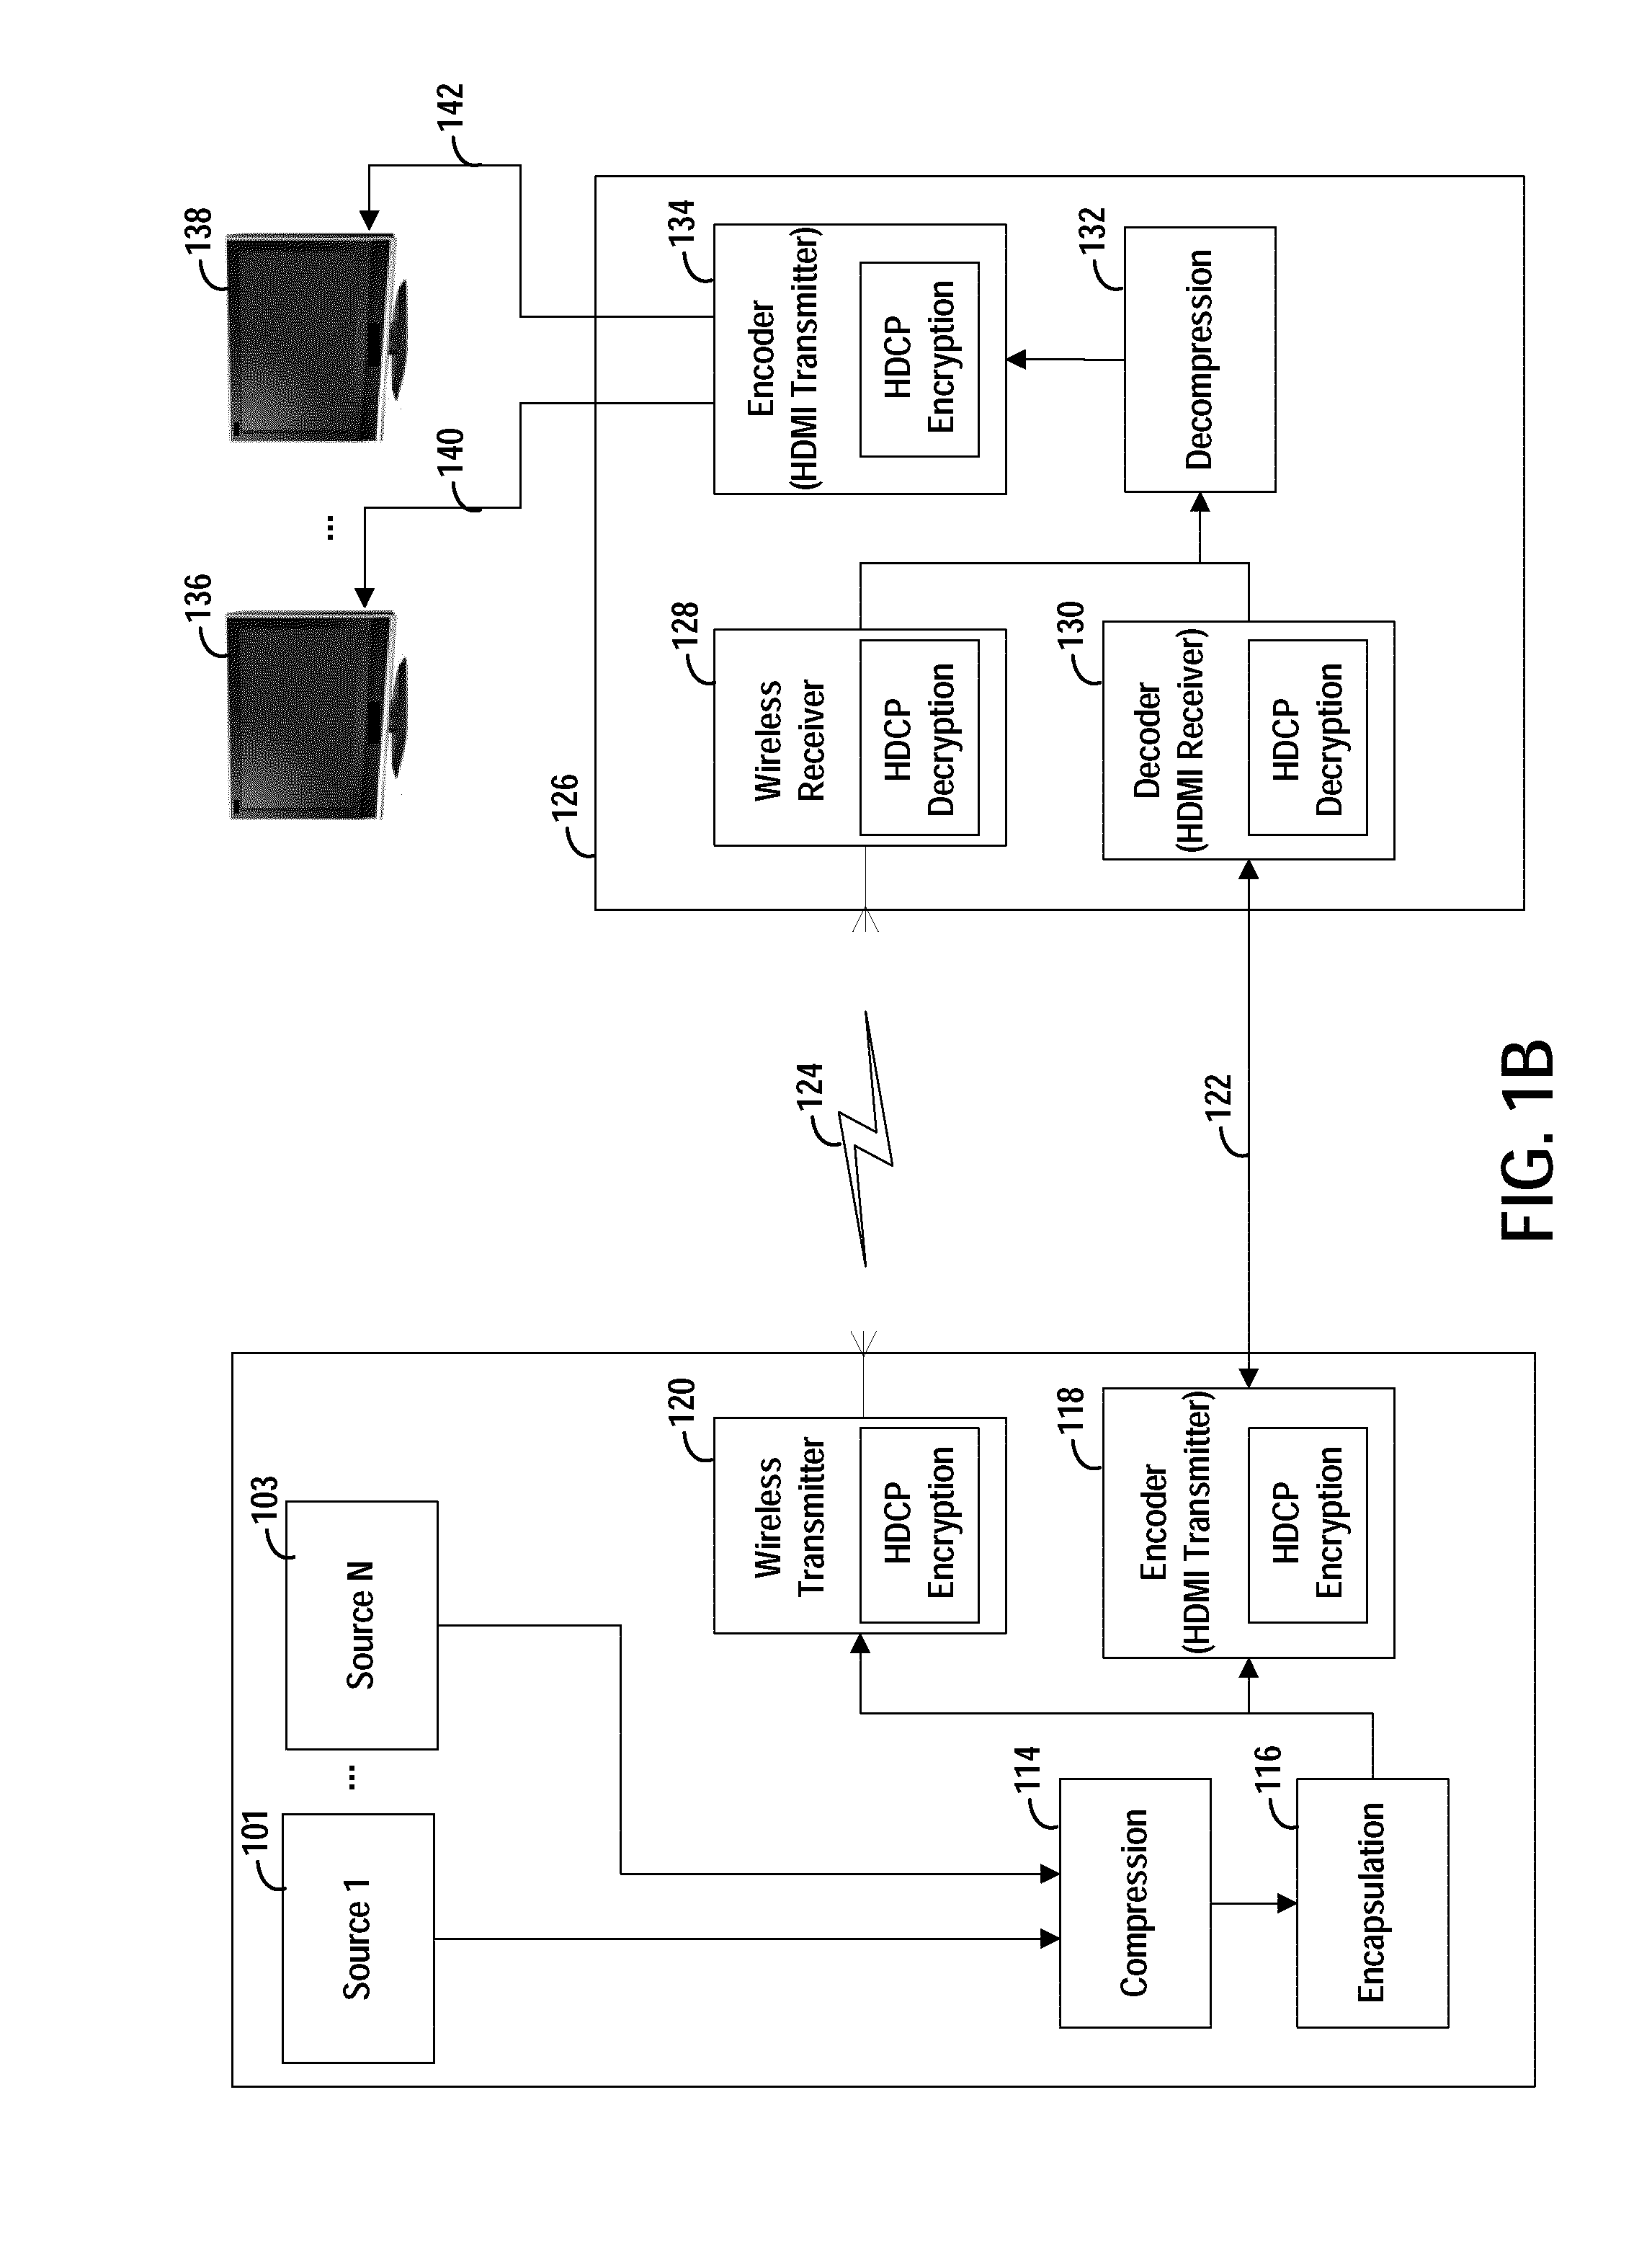 Methods, systems and devices for compression of data and transmission thereof using video transmission standards